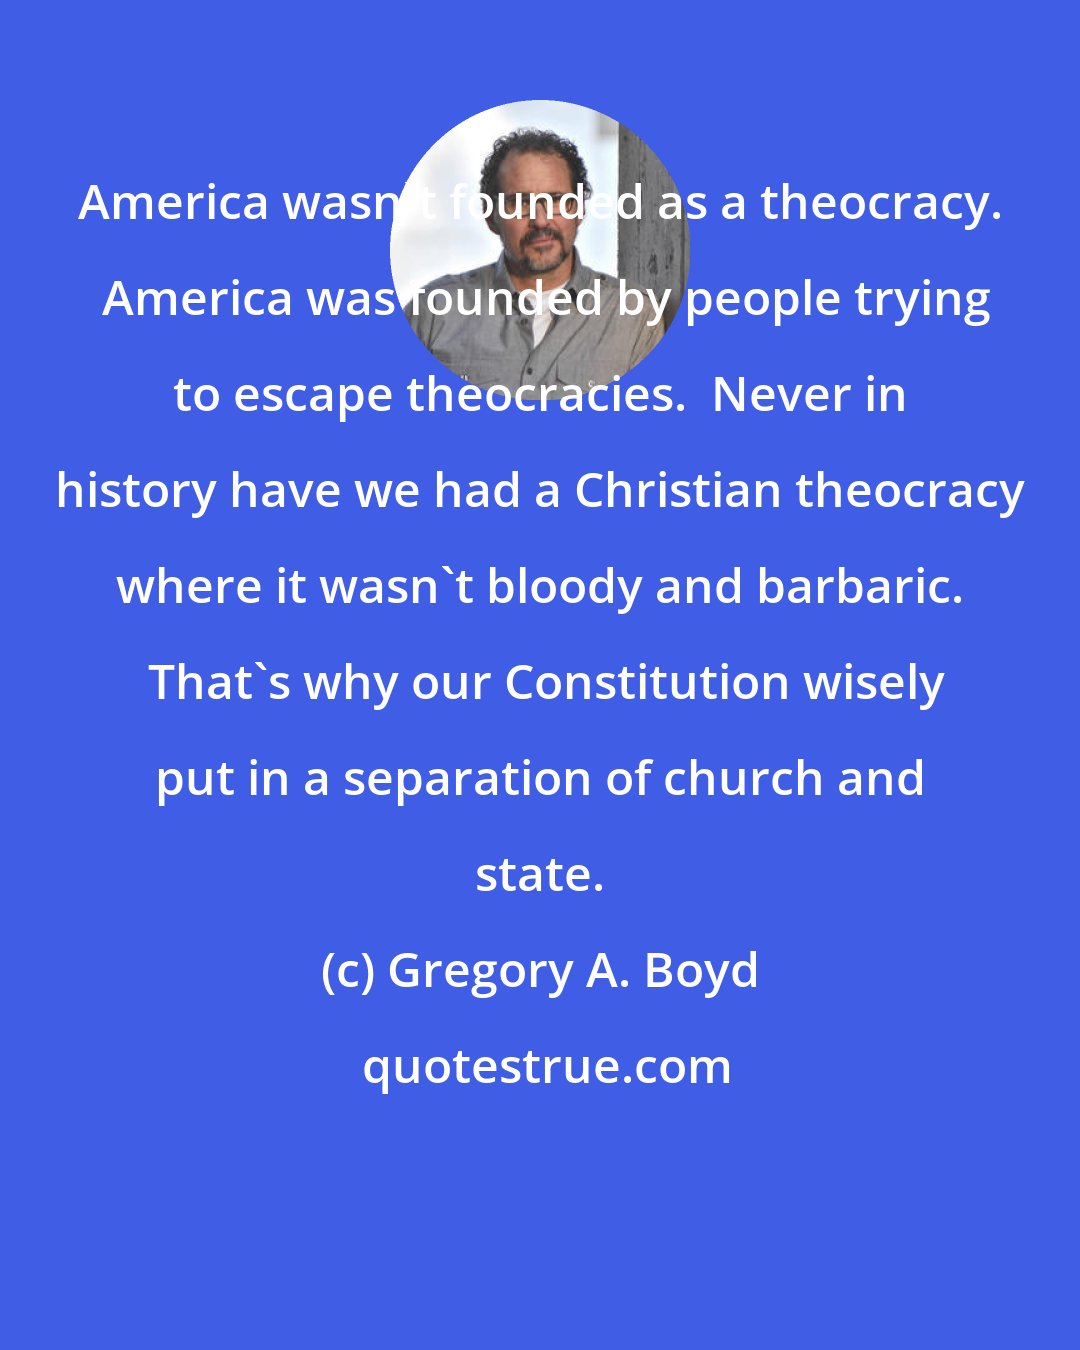 Gregory A. Boyd: America wasn't founded as a theocracy.  America was founded by people trying to escape theocracies.  Never in history have we had a Christian theocracy where it wasn't bloody and barbaric.  That's why our Constitution wisely put in a separation of church and state.